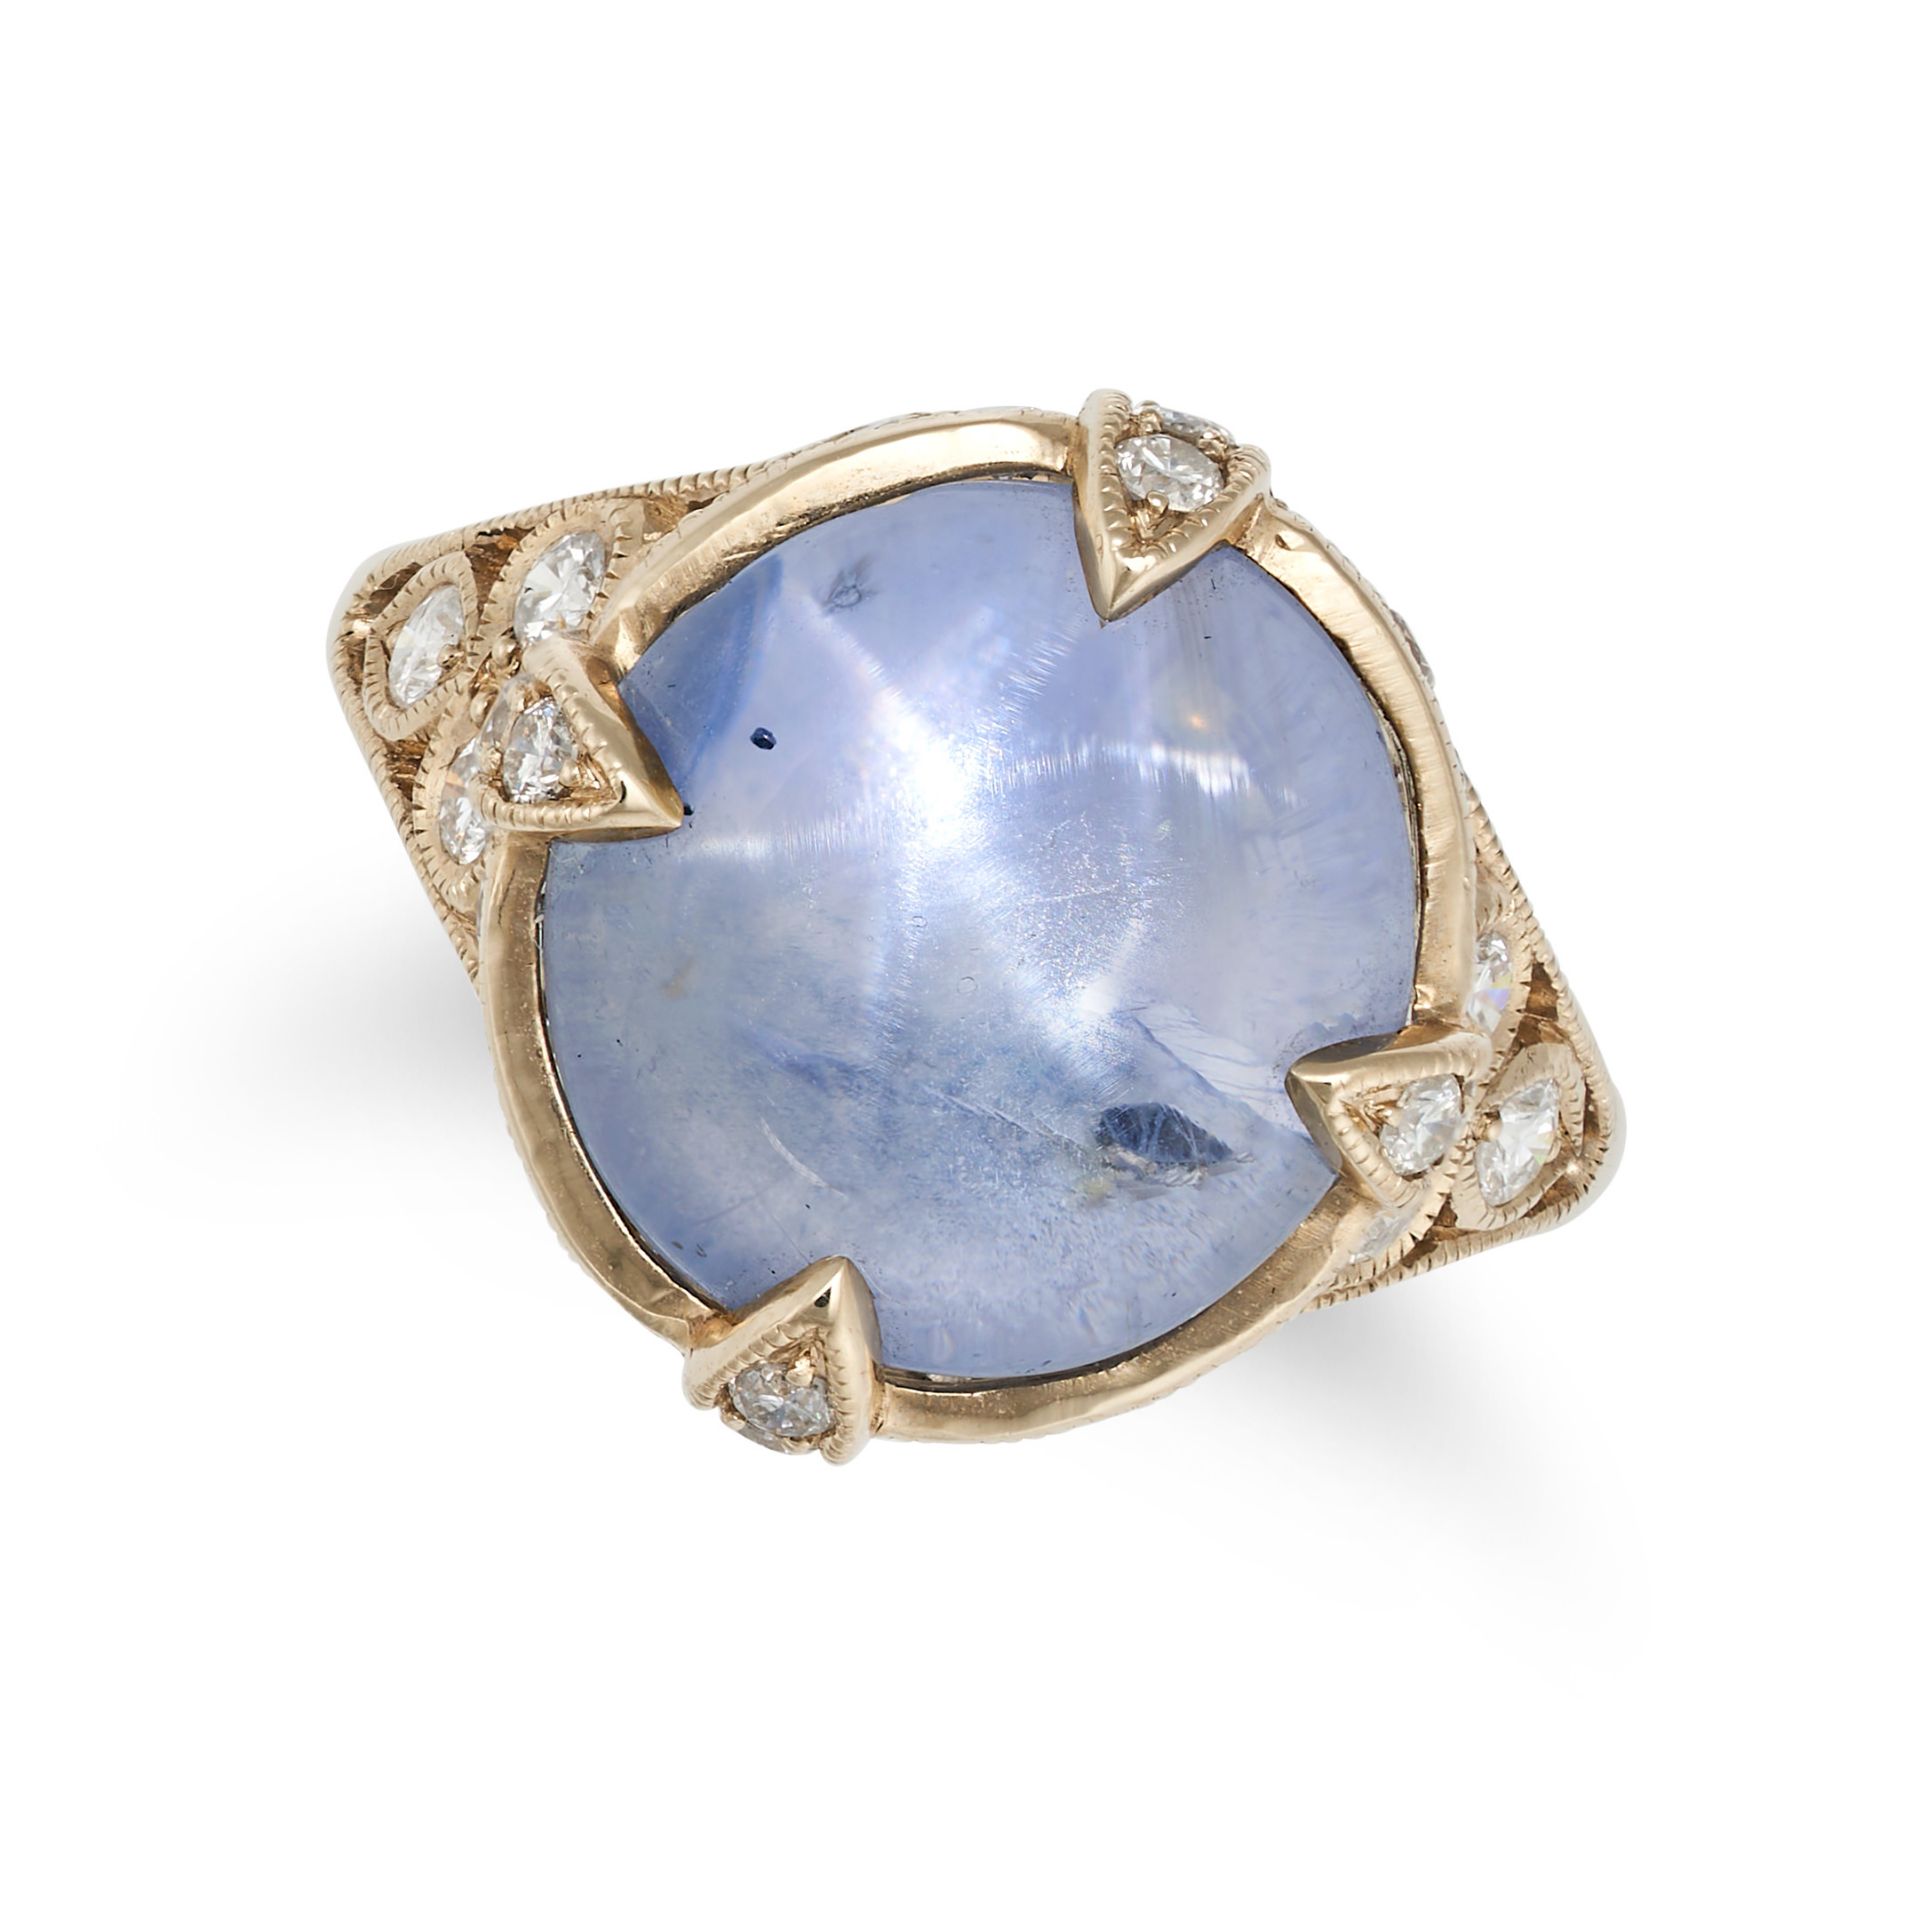 A STAR SAPPHIRE AND DIAMOND RING in 18ct yellow gold, set with a cabochon star sapphire of 10.85 ...